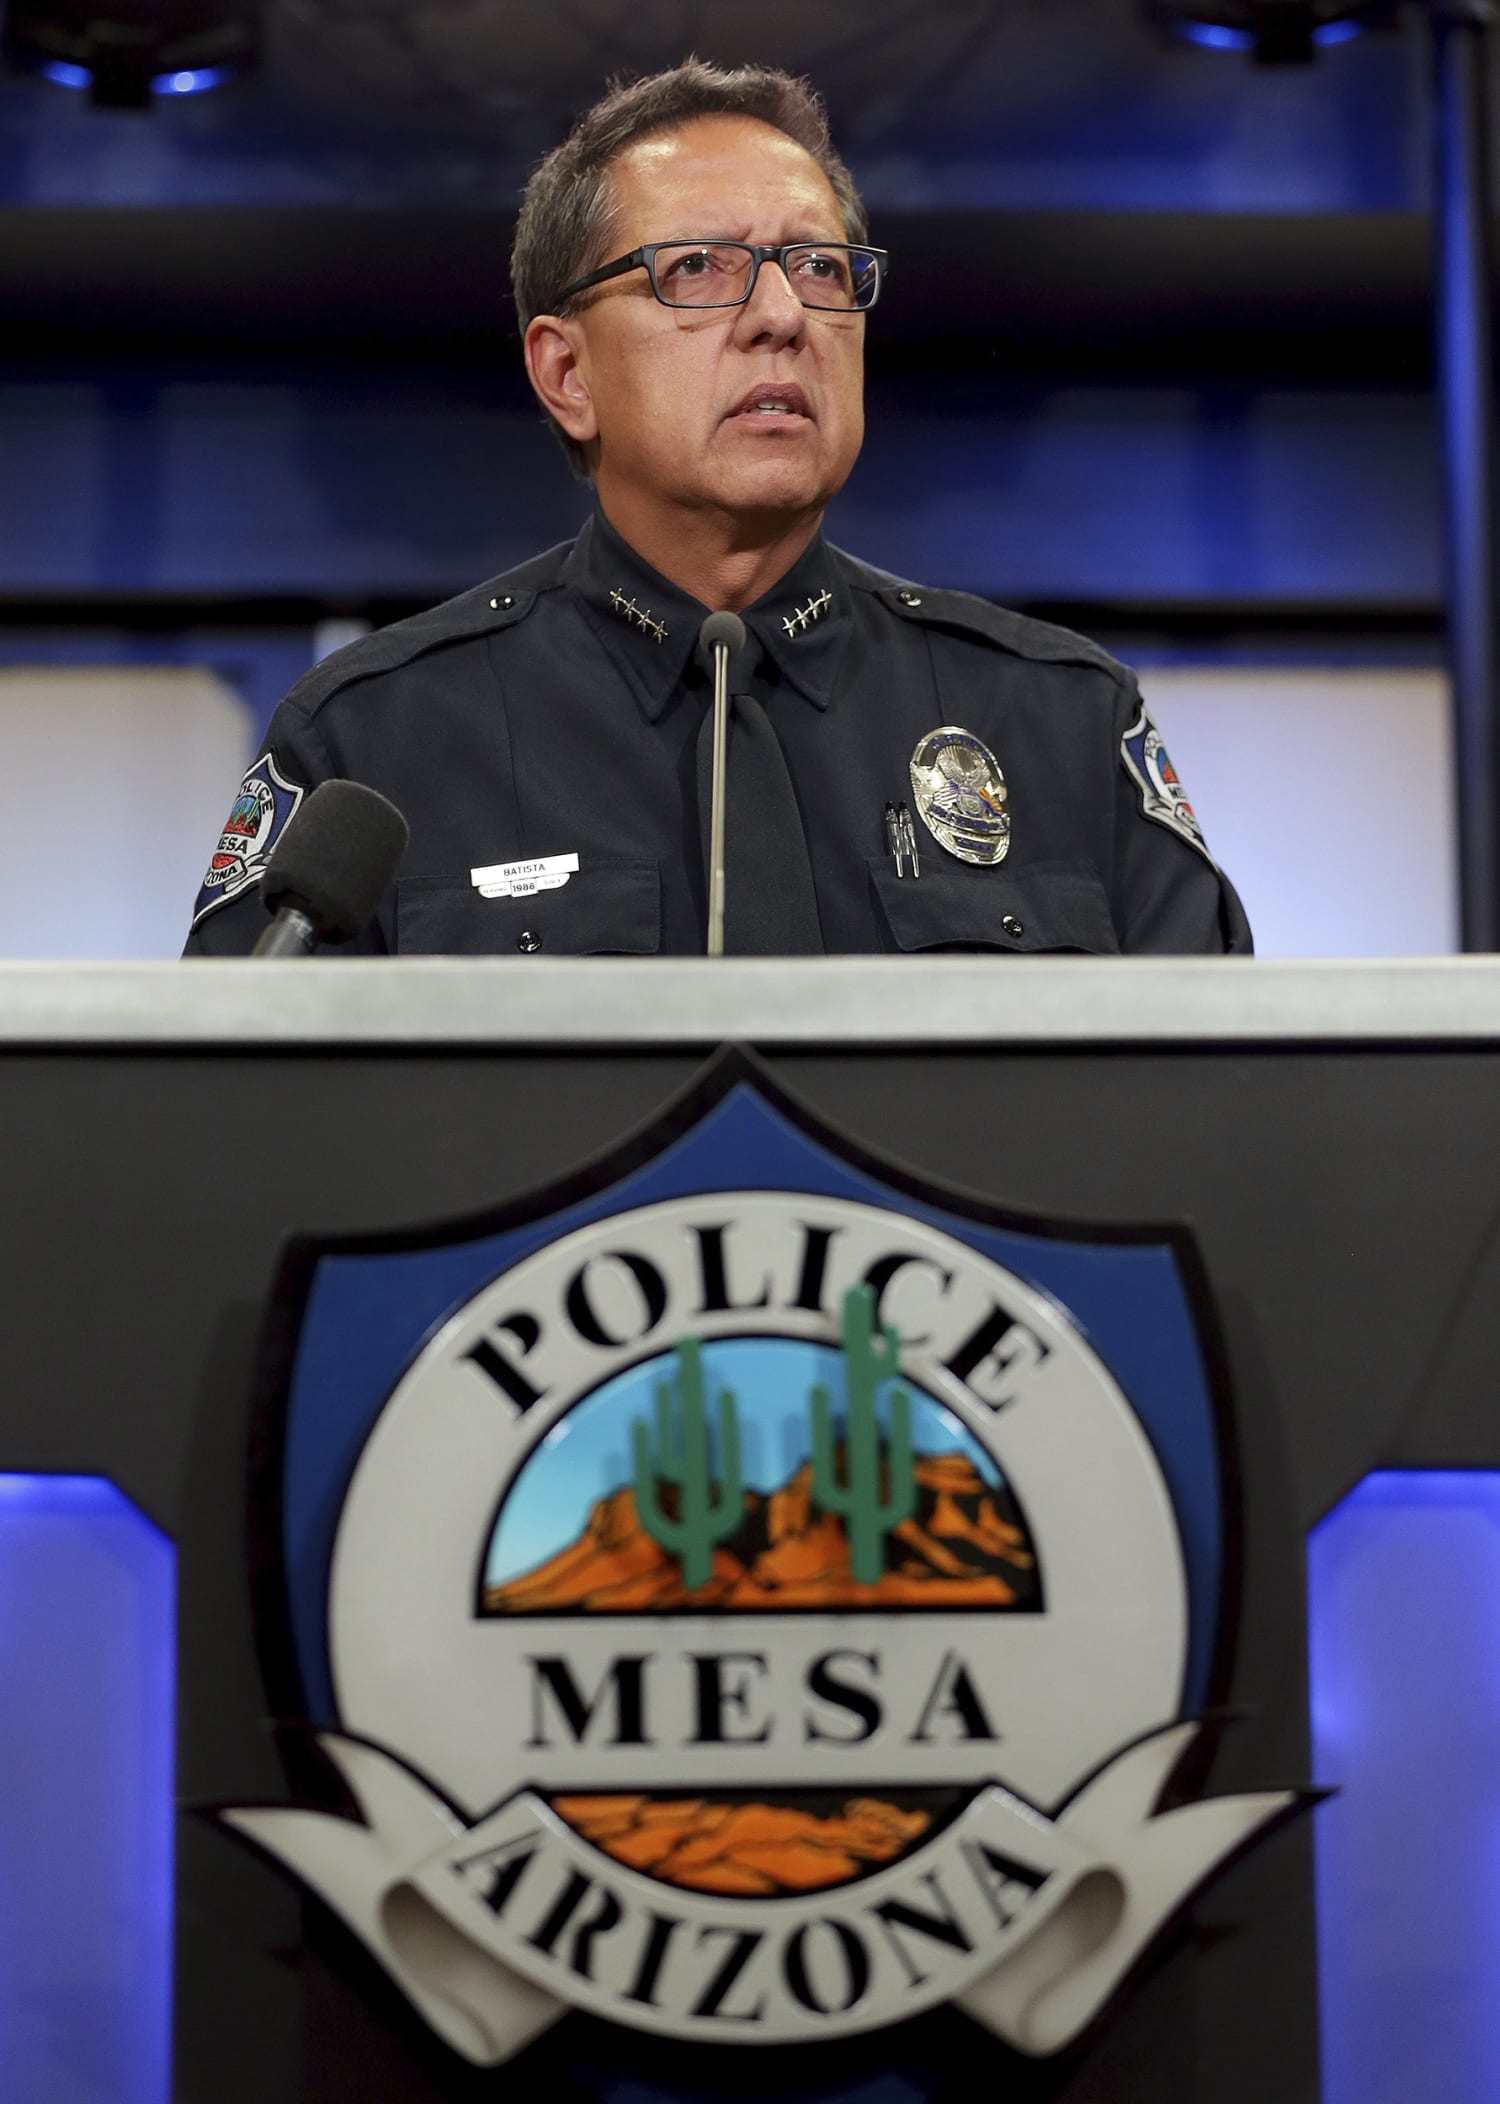 Mesa Police Introduce Website to Combat Illegal Fireworks Ahead of Fourth of July